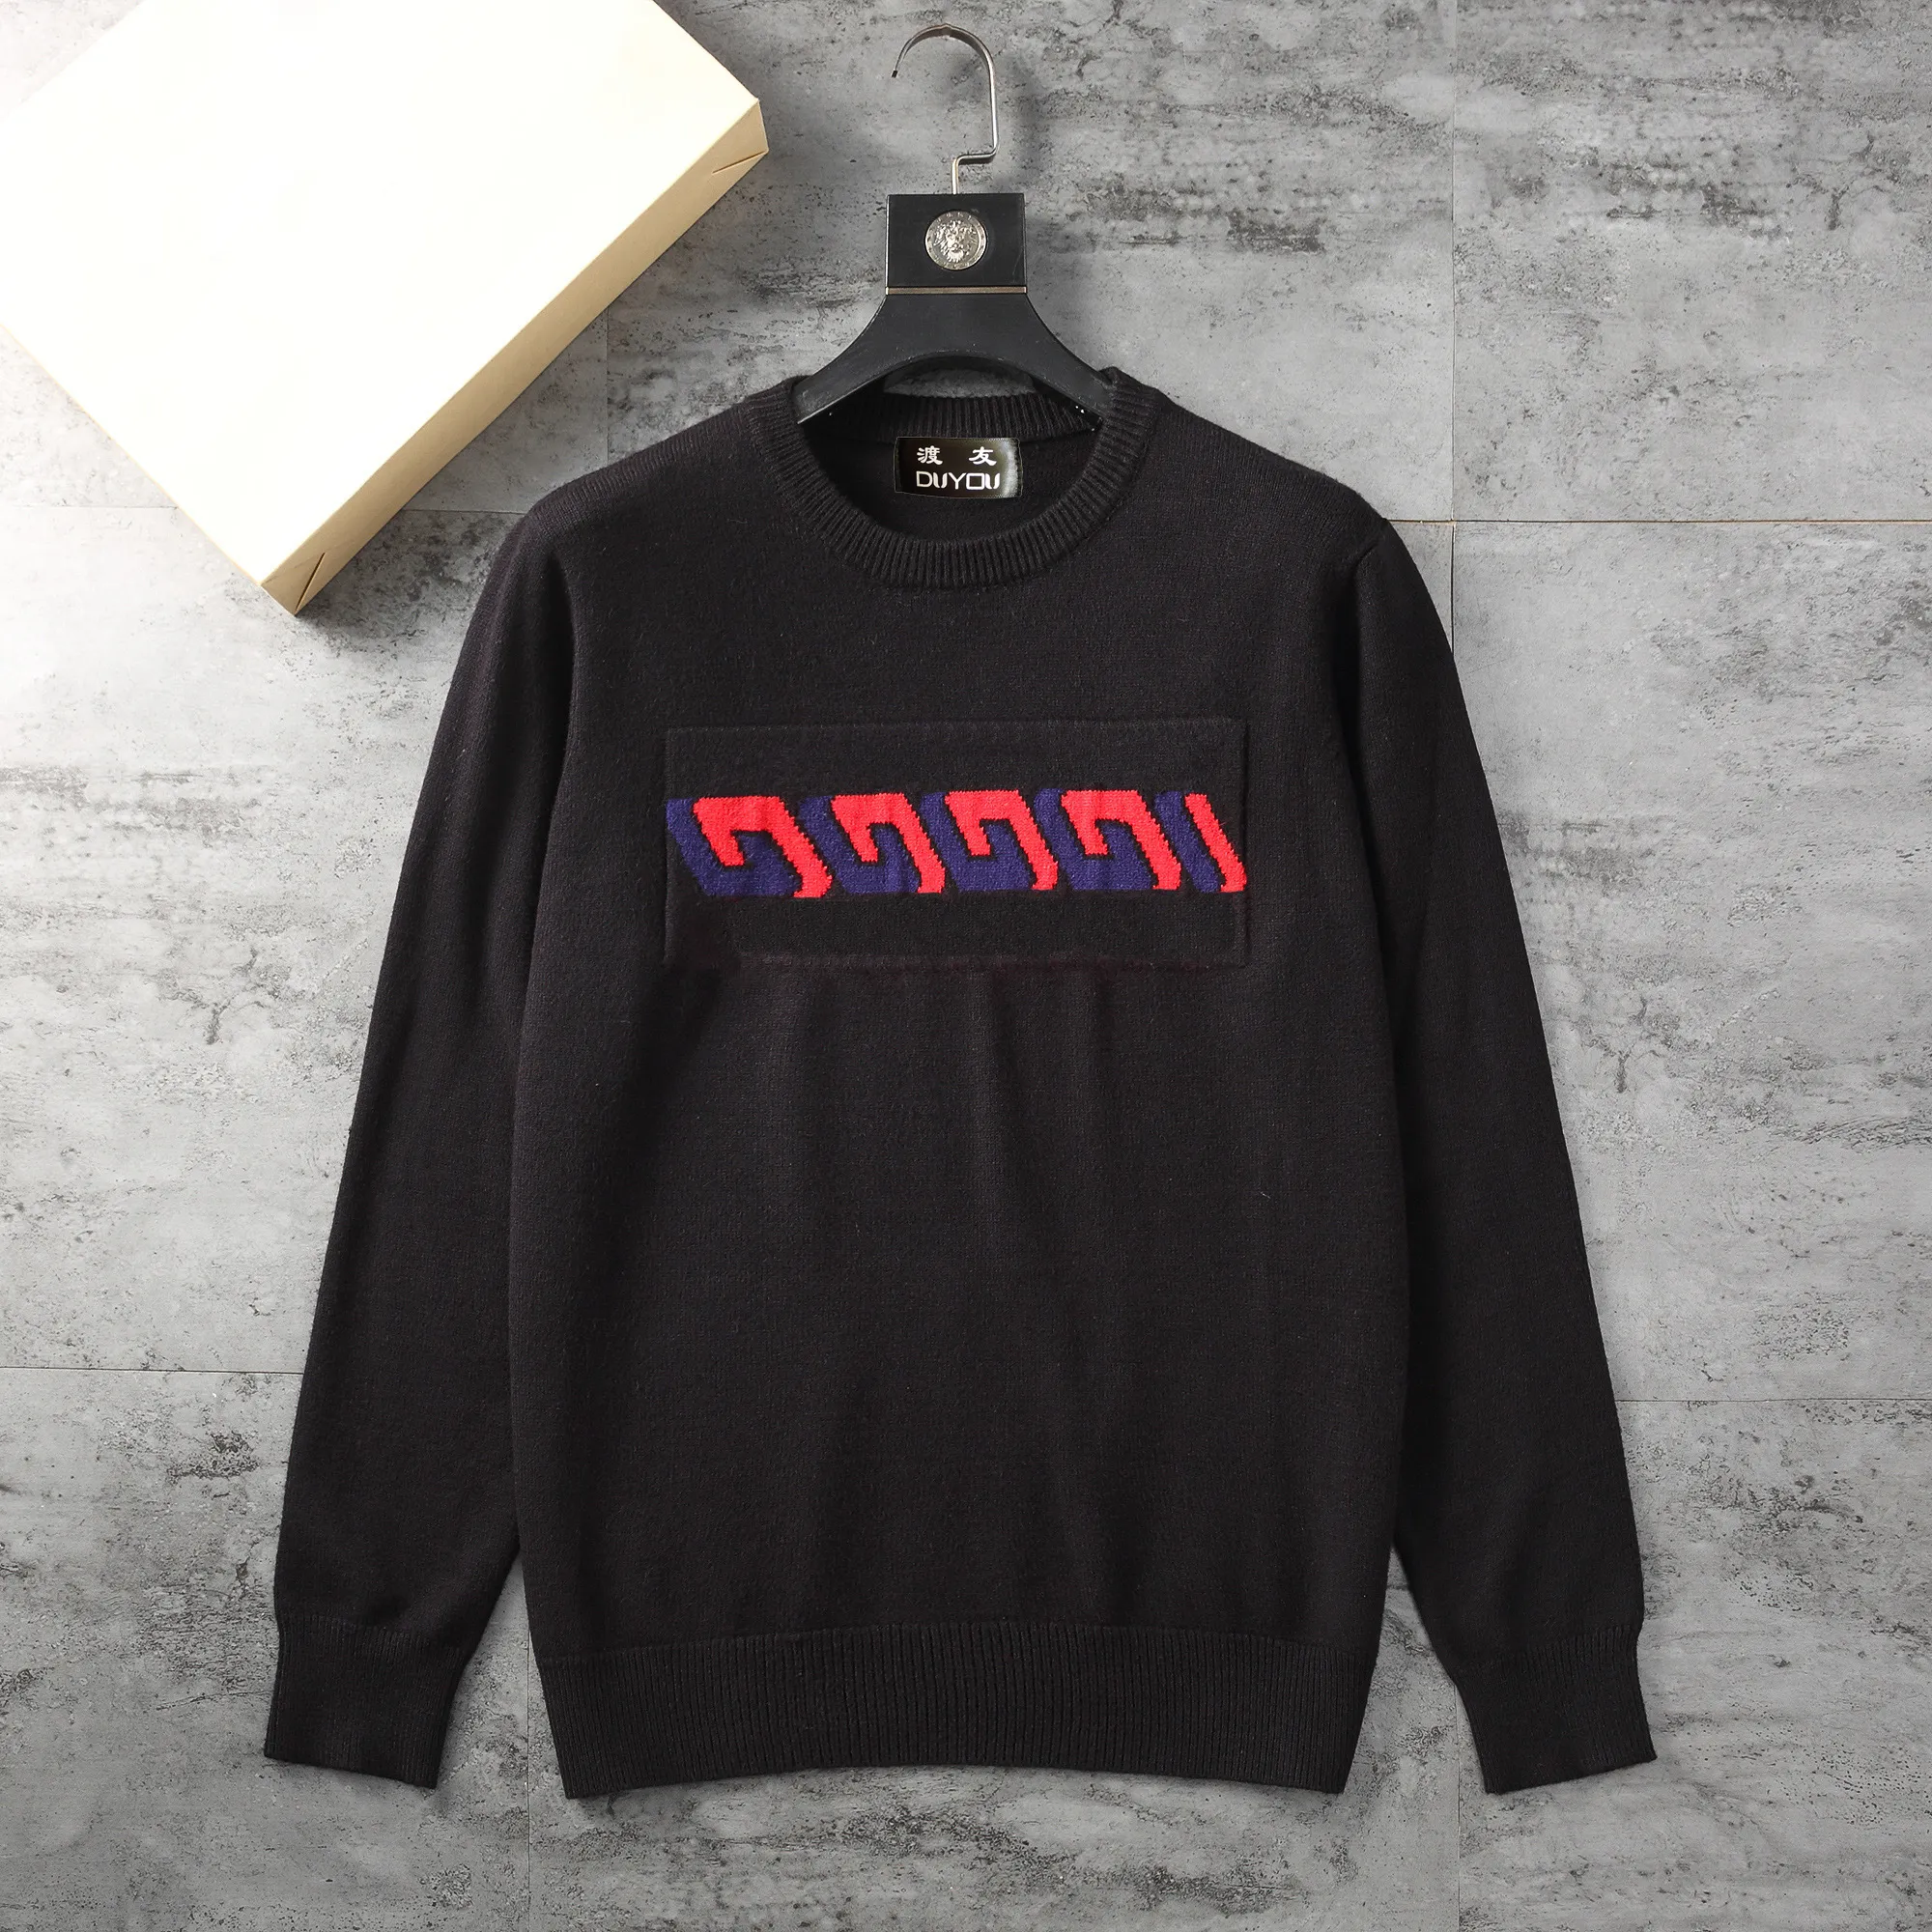 DUYOU ROUND-NECK SWEATER Knitted Sweater Men Gothic Letter Print Pullover Harajuku Cotton Sweaters for Women 84536